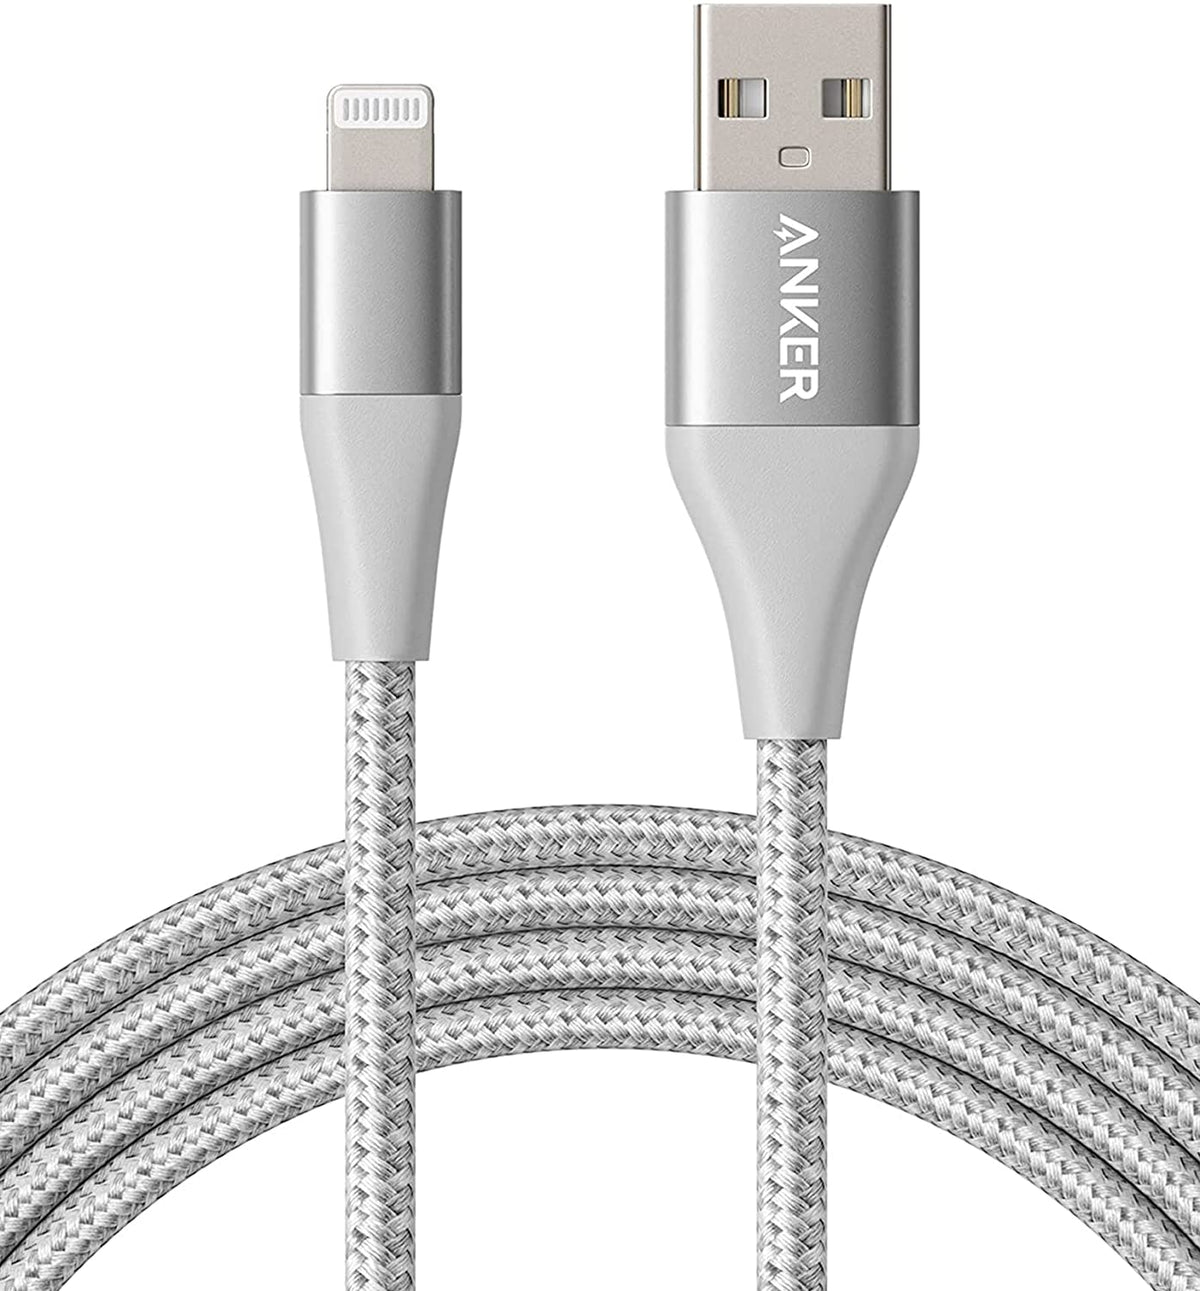 Powerline+ II Lightning Cable - 6ft